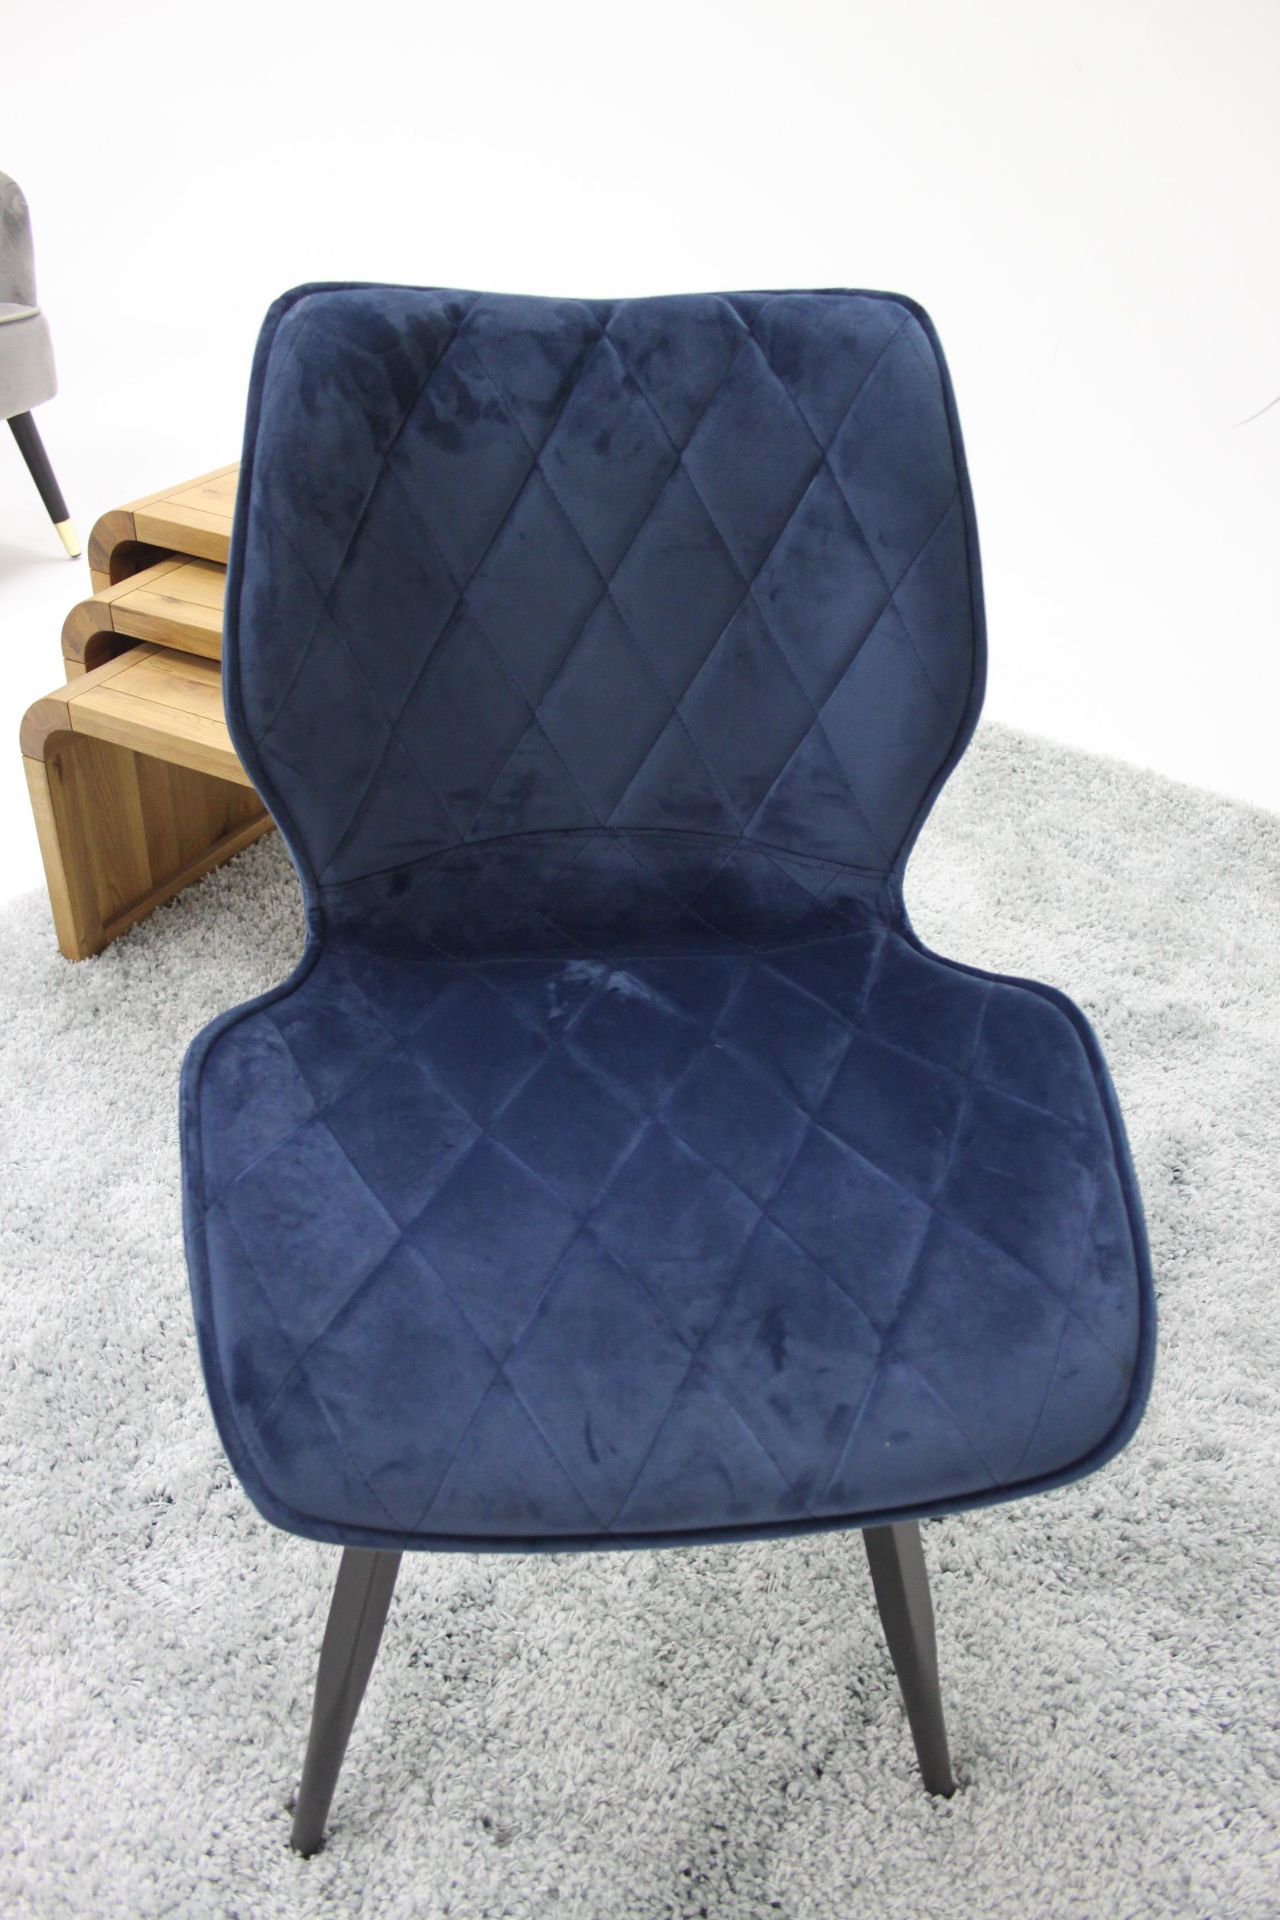 Alfa Diamond Dining Chair Blue Diamond Quilted Upholstery Gives A Luxury Finish To These Stylish - Image 2 of 3